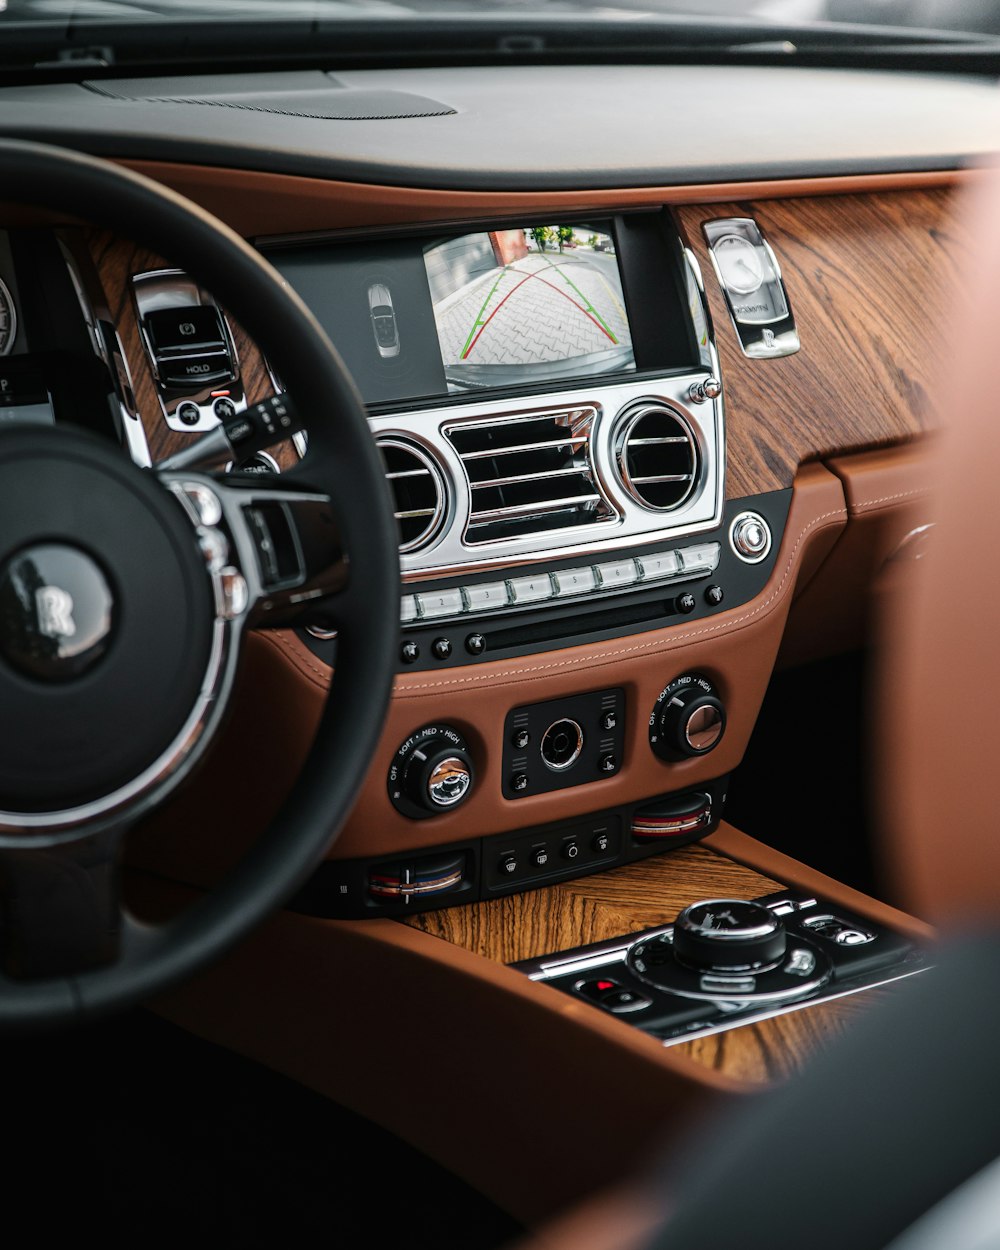 500+ Car Dashboard Pictures [HD]  Download Free Images on Unsplash